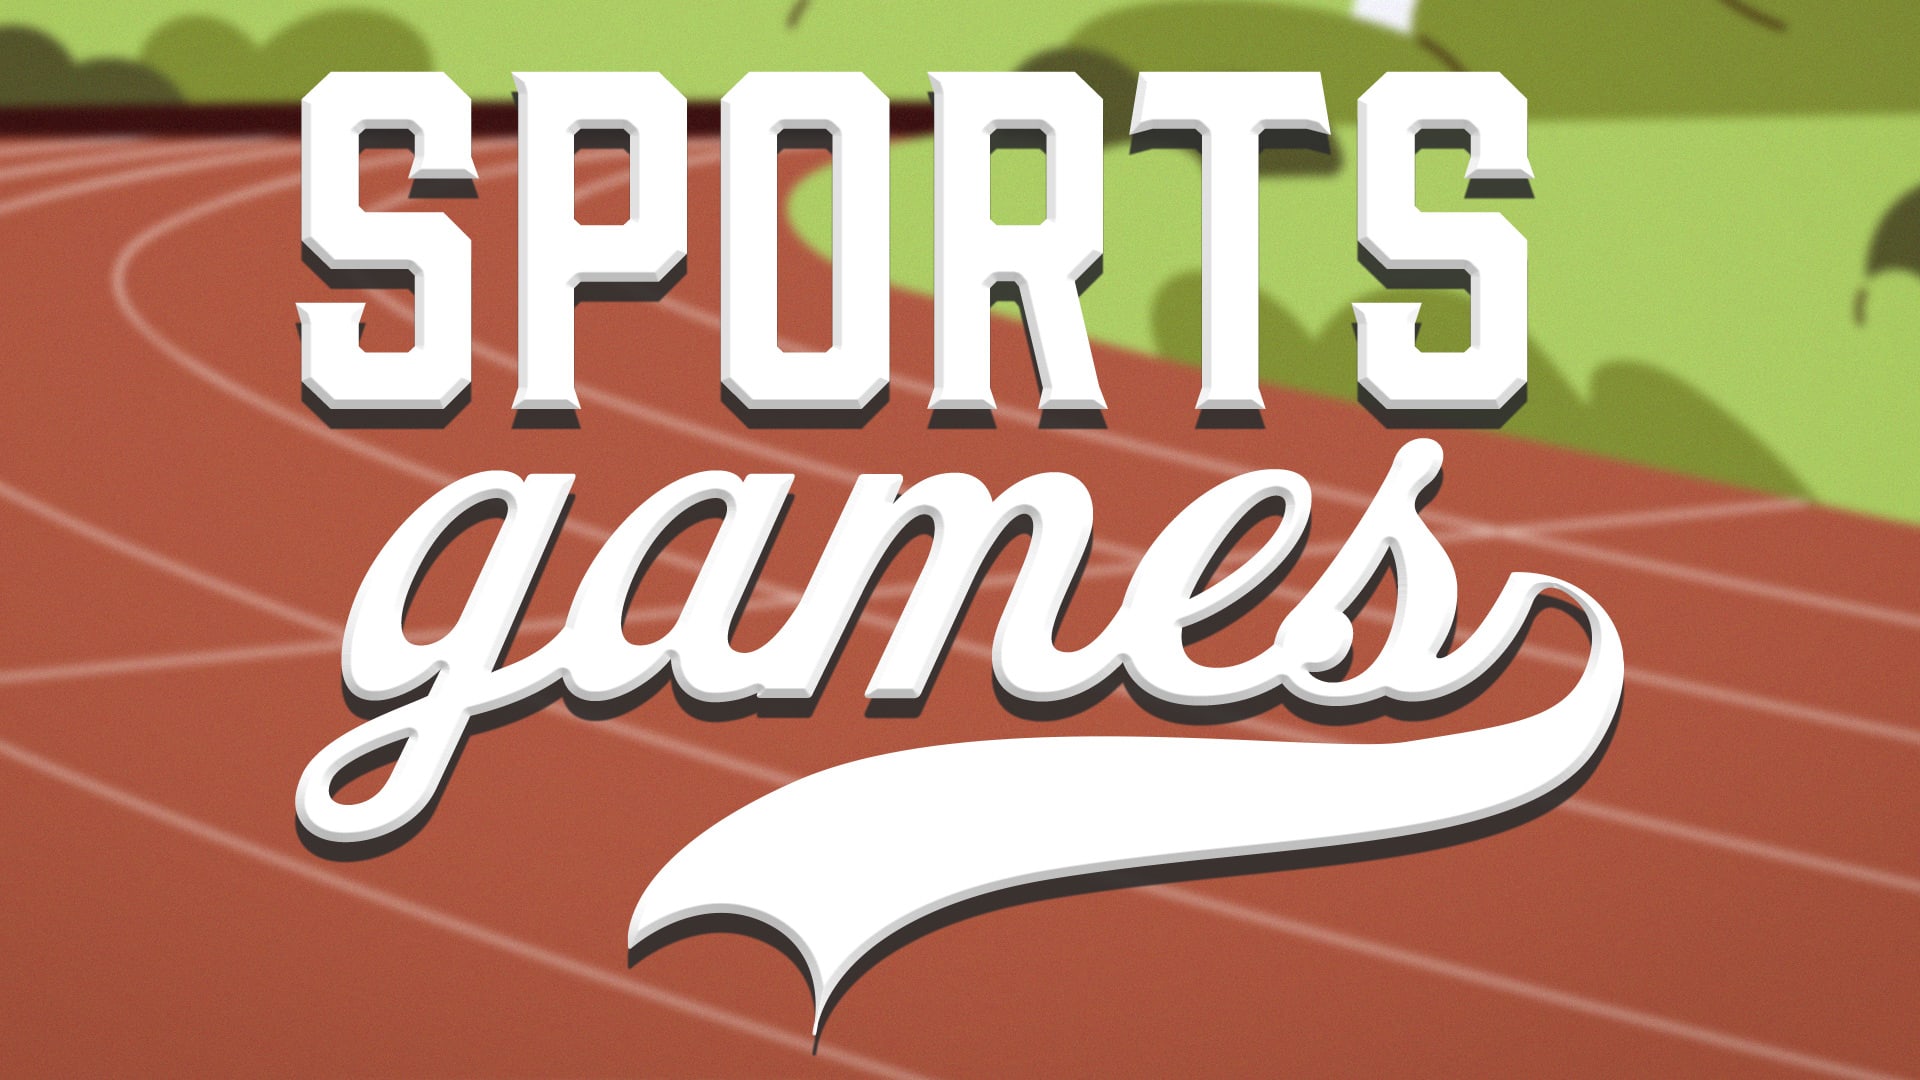 Put your skills to the test with this selection of sport games! Hero